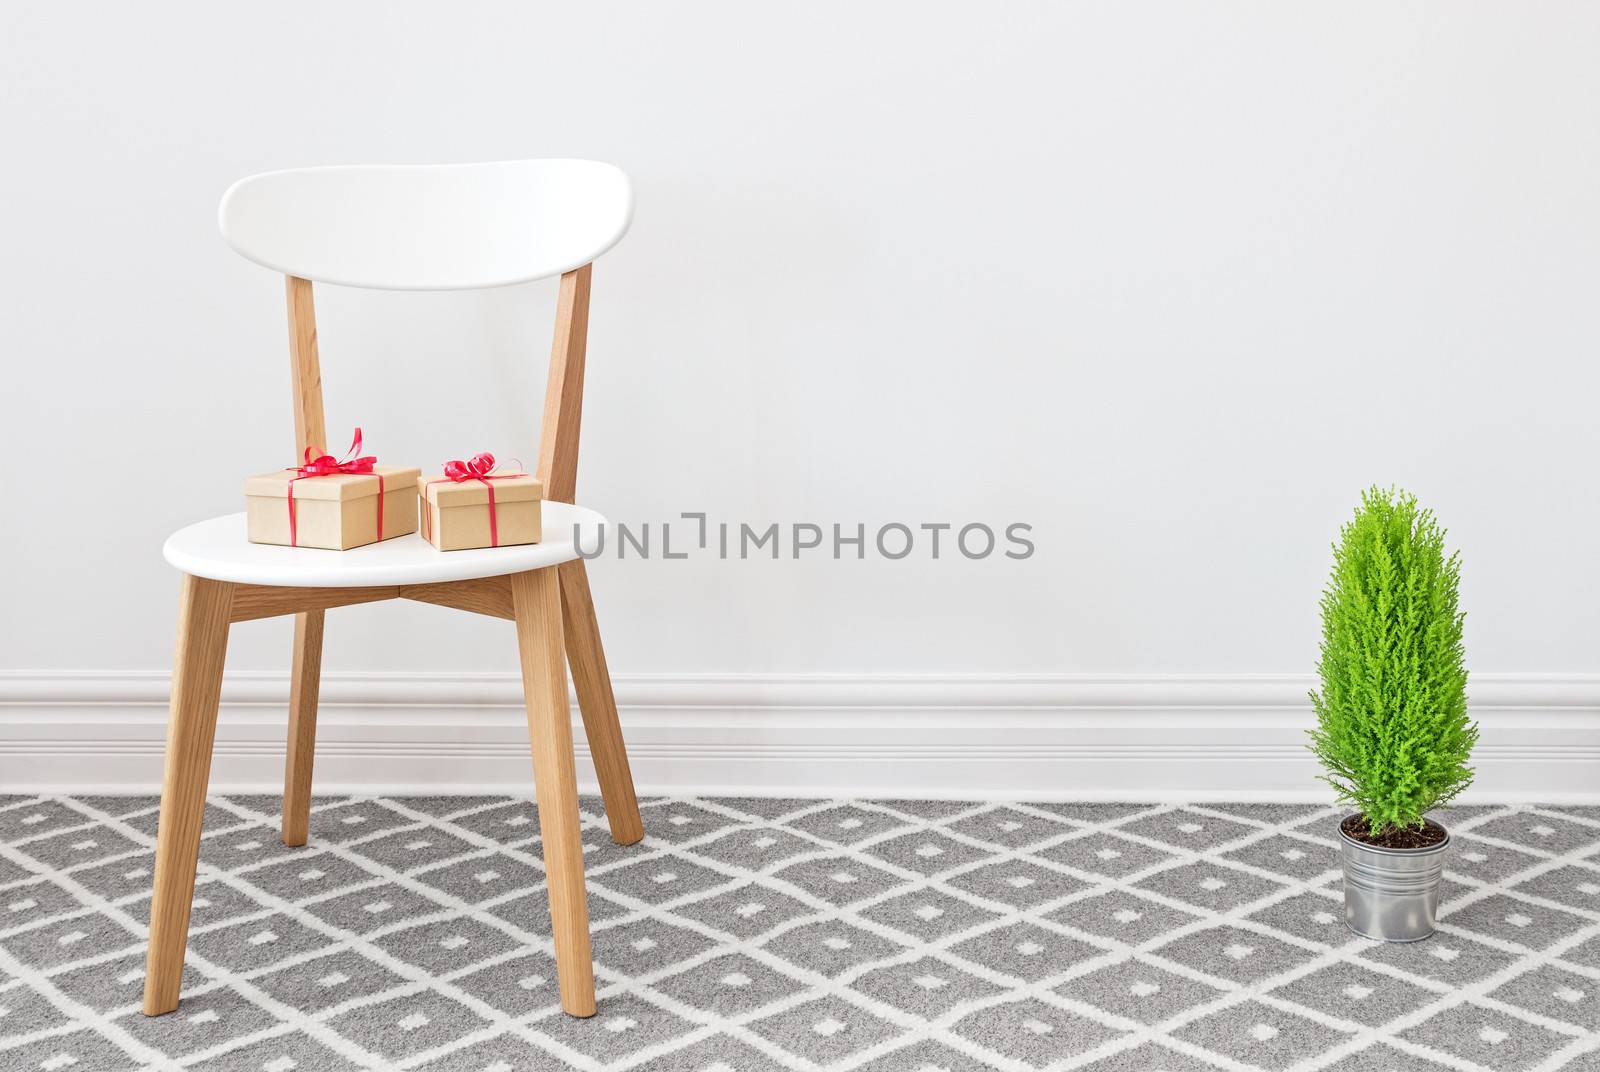 Presents on an elegant white chair, and little green cypress tree.